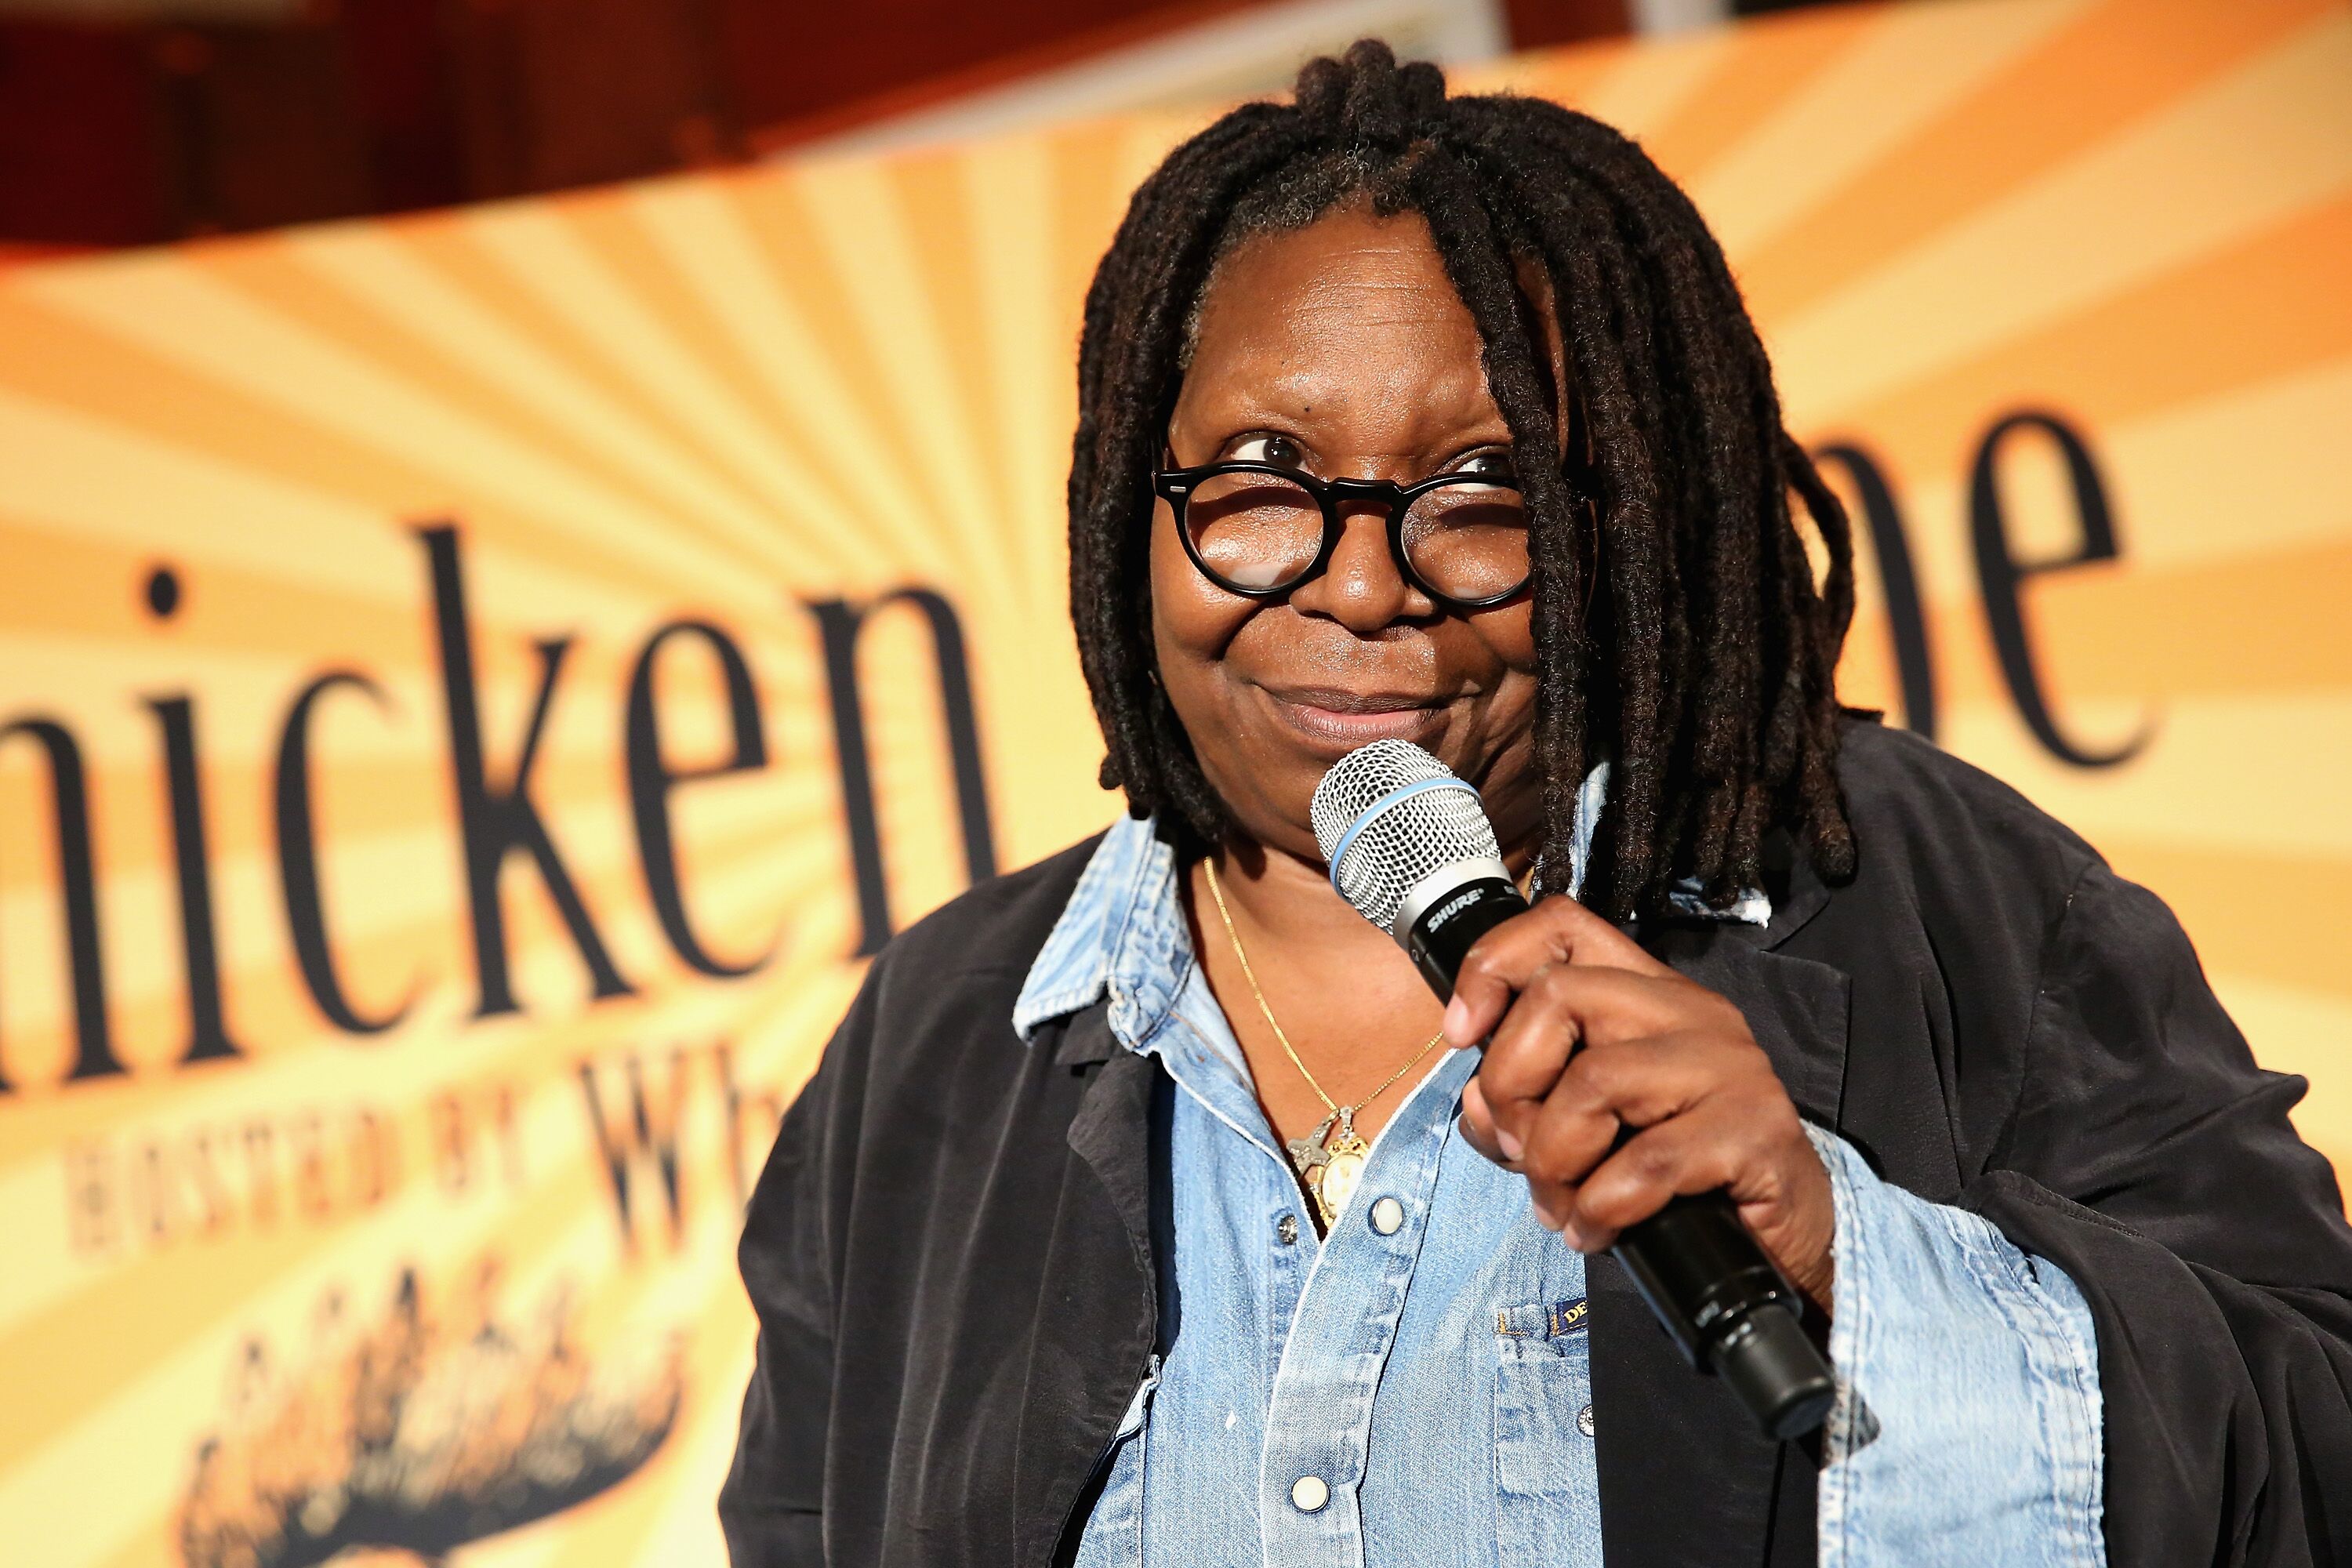 Whoopi Goldberg, speaks at Chicken Coupe during Food Network & Cooking Channel New York City Wine & Food Festival at The Loeb Boathouse on October 15, 2015. | Source: Getty Images